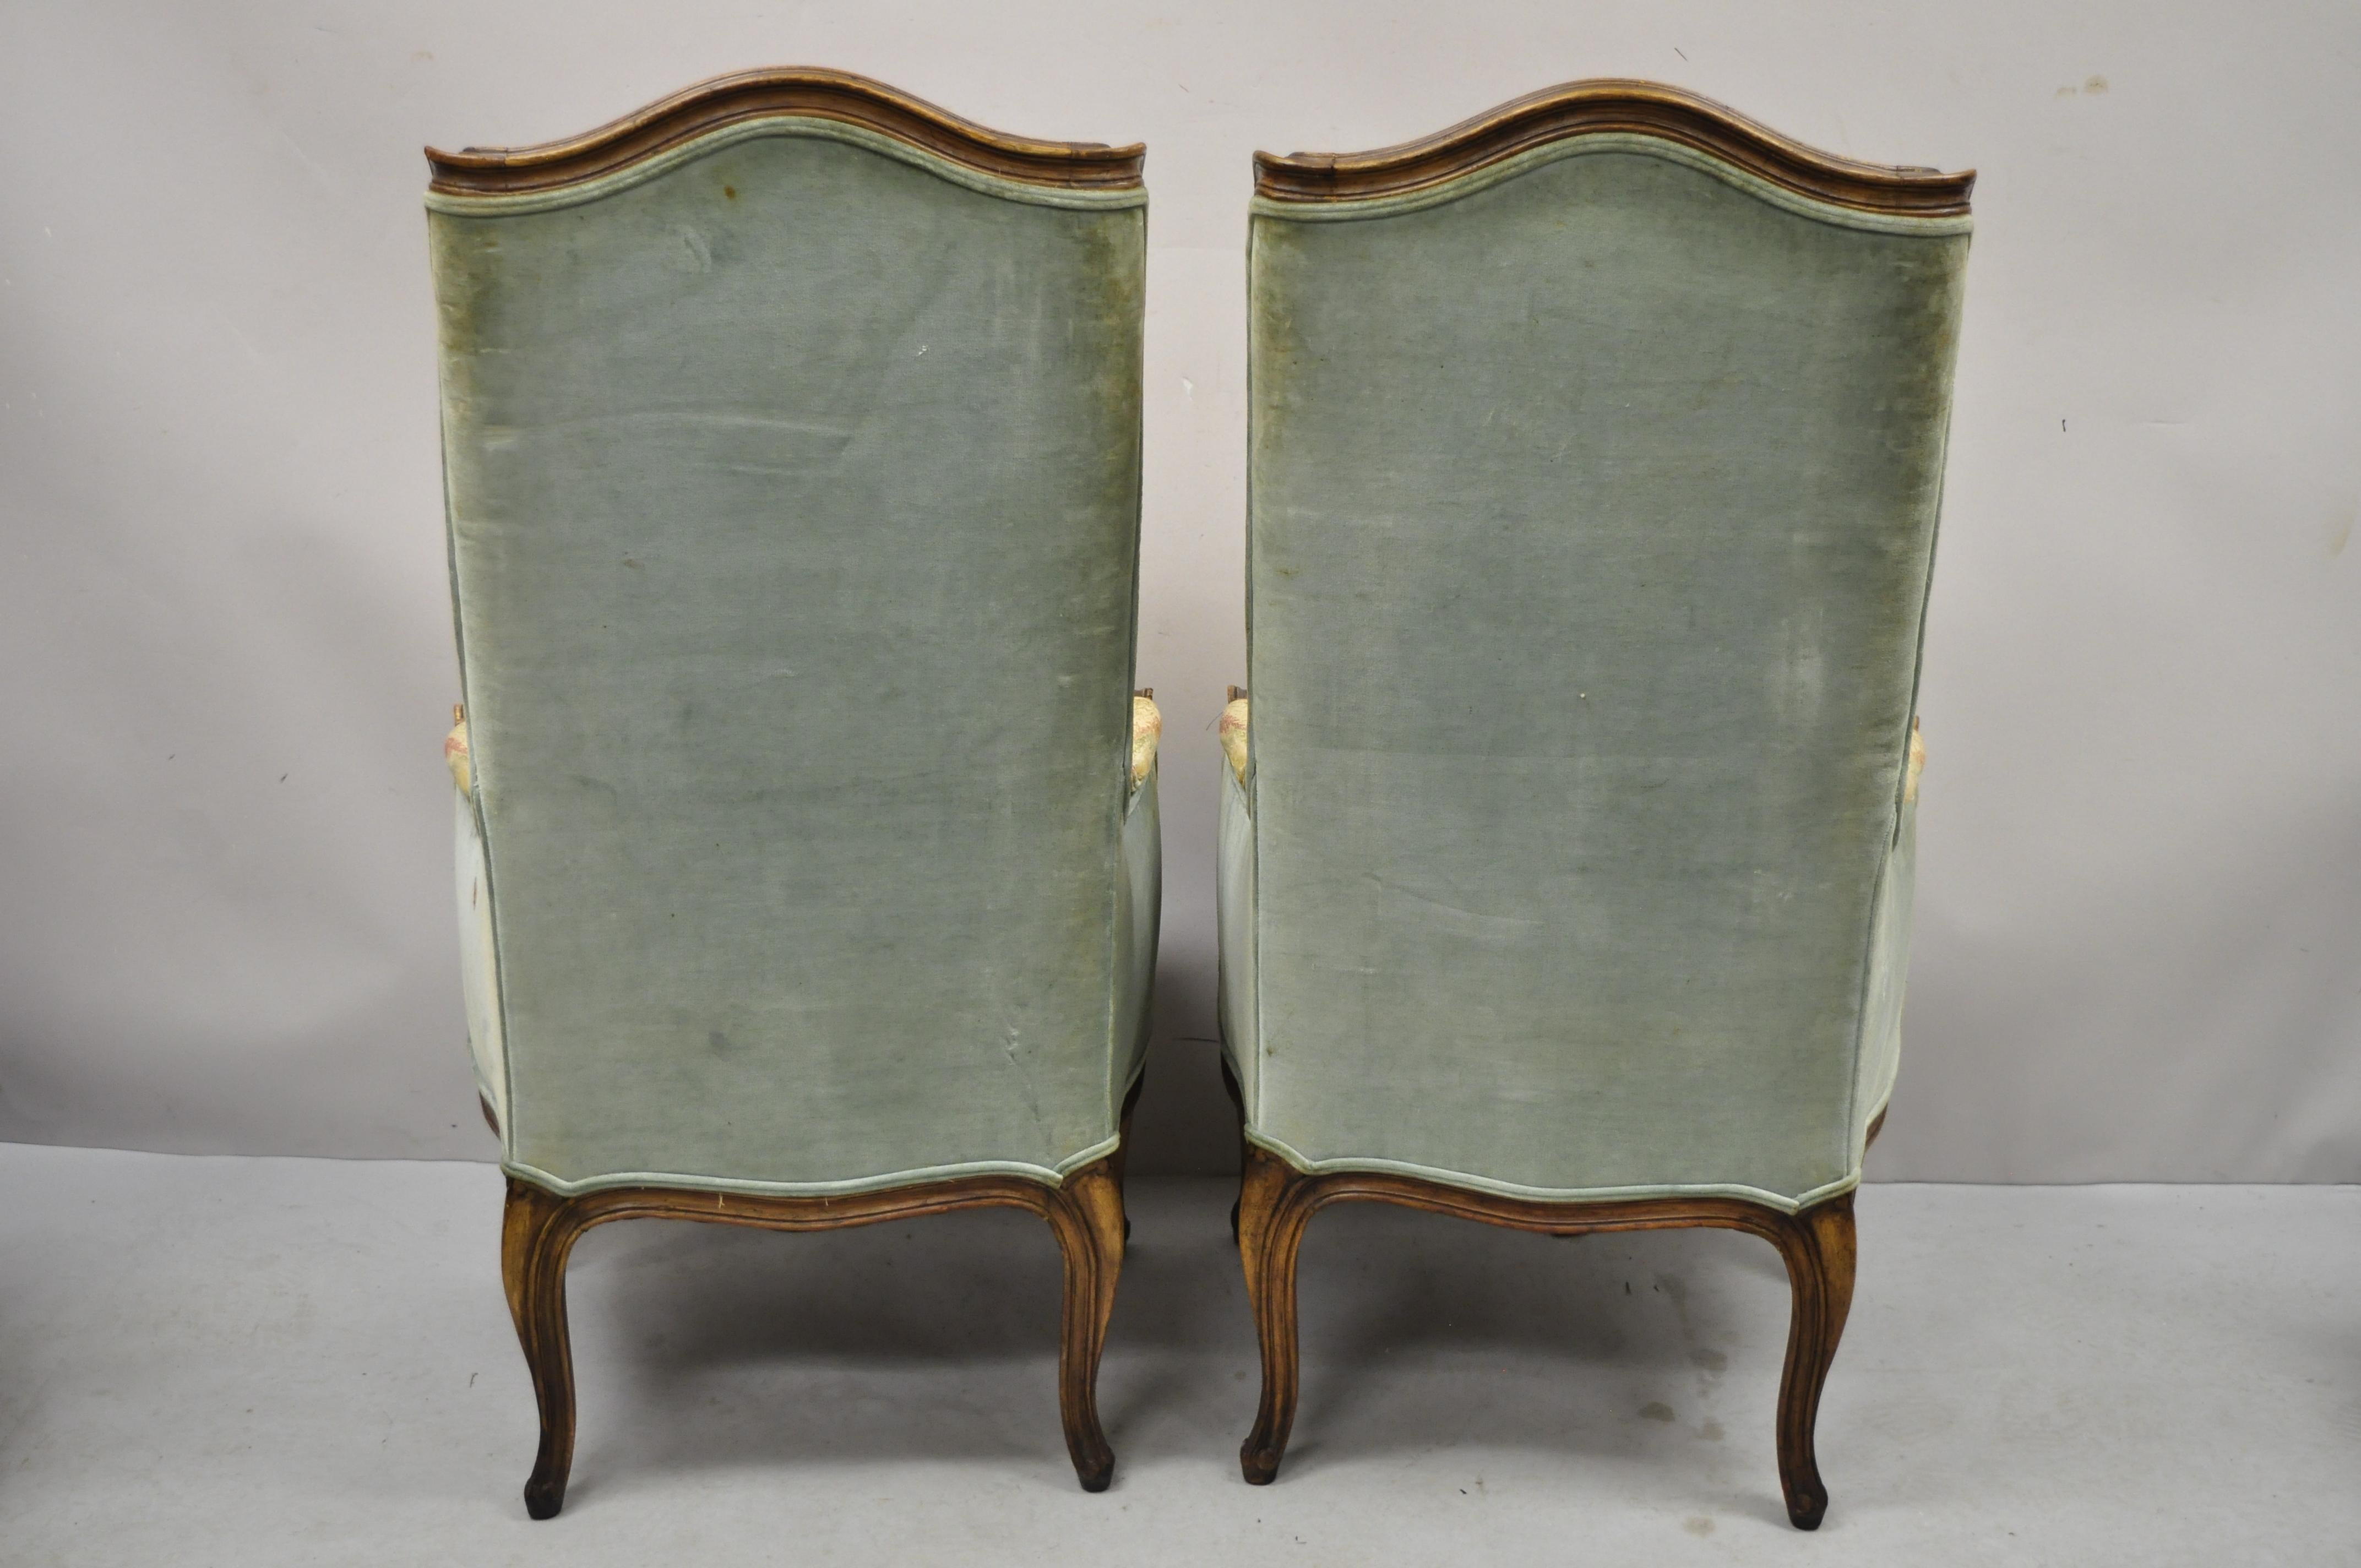 Vintage French Provincial Louis XV Country Narrow Tall Back Chairs 'A' - a Pair For Sale 3